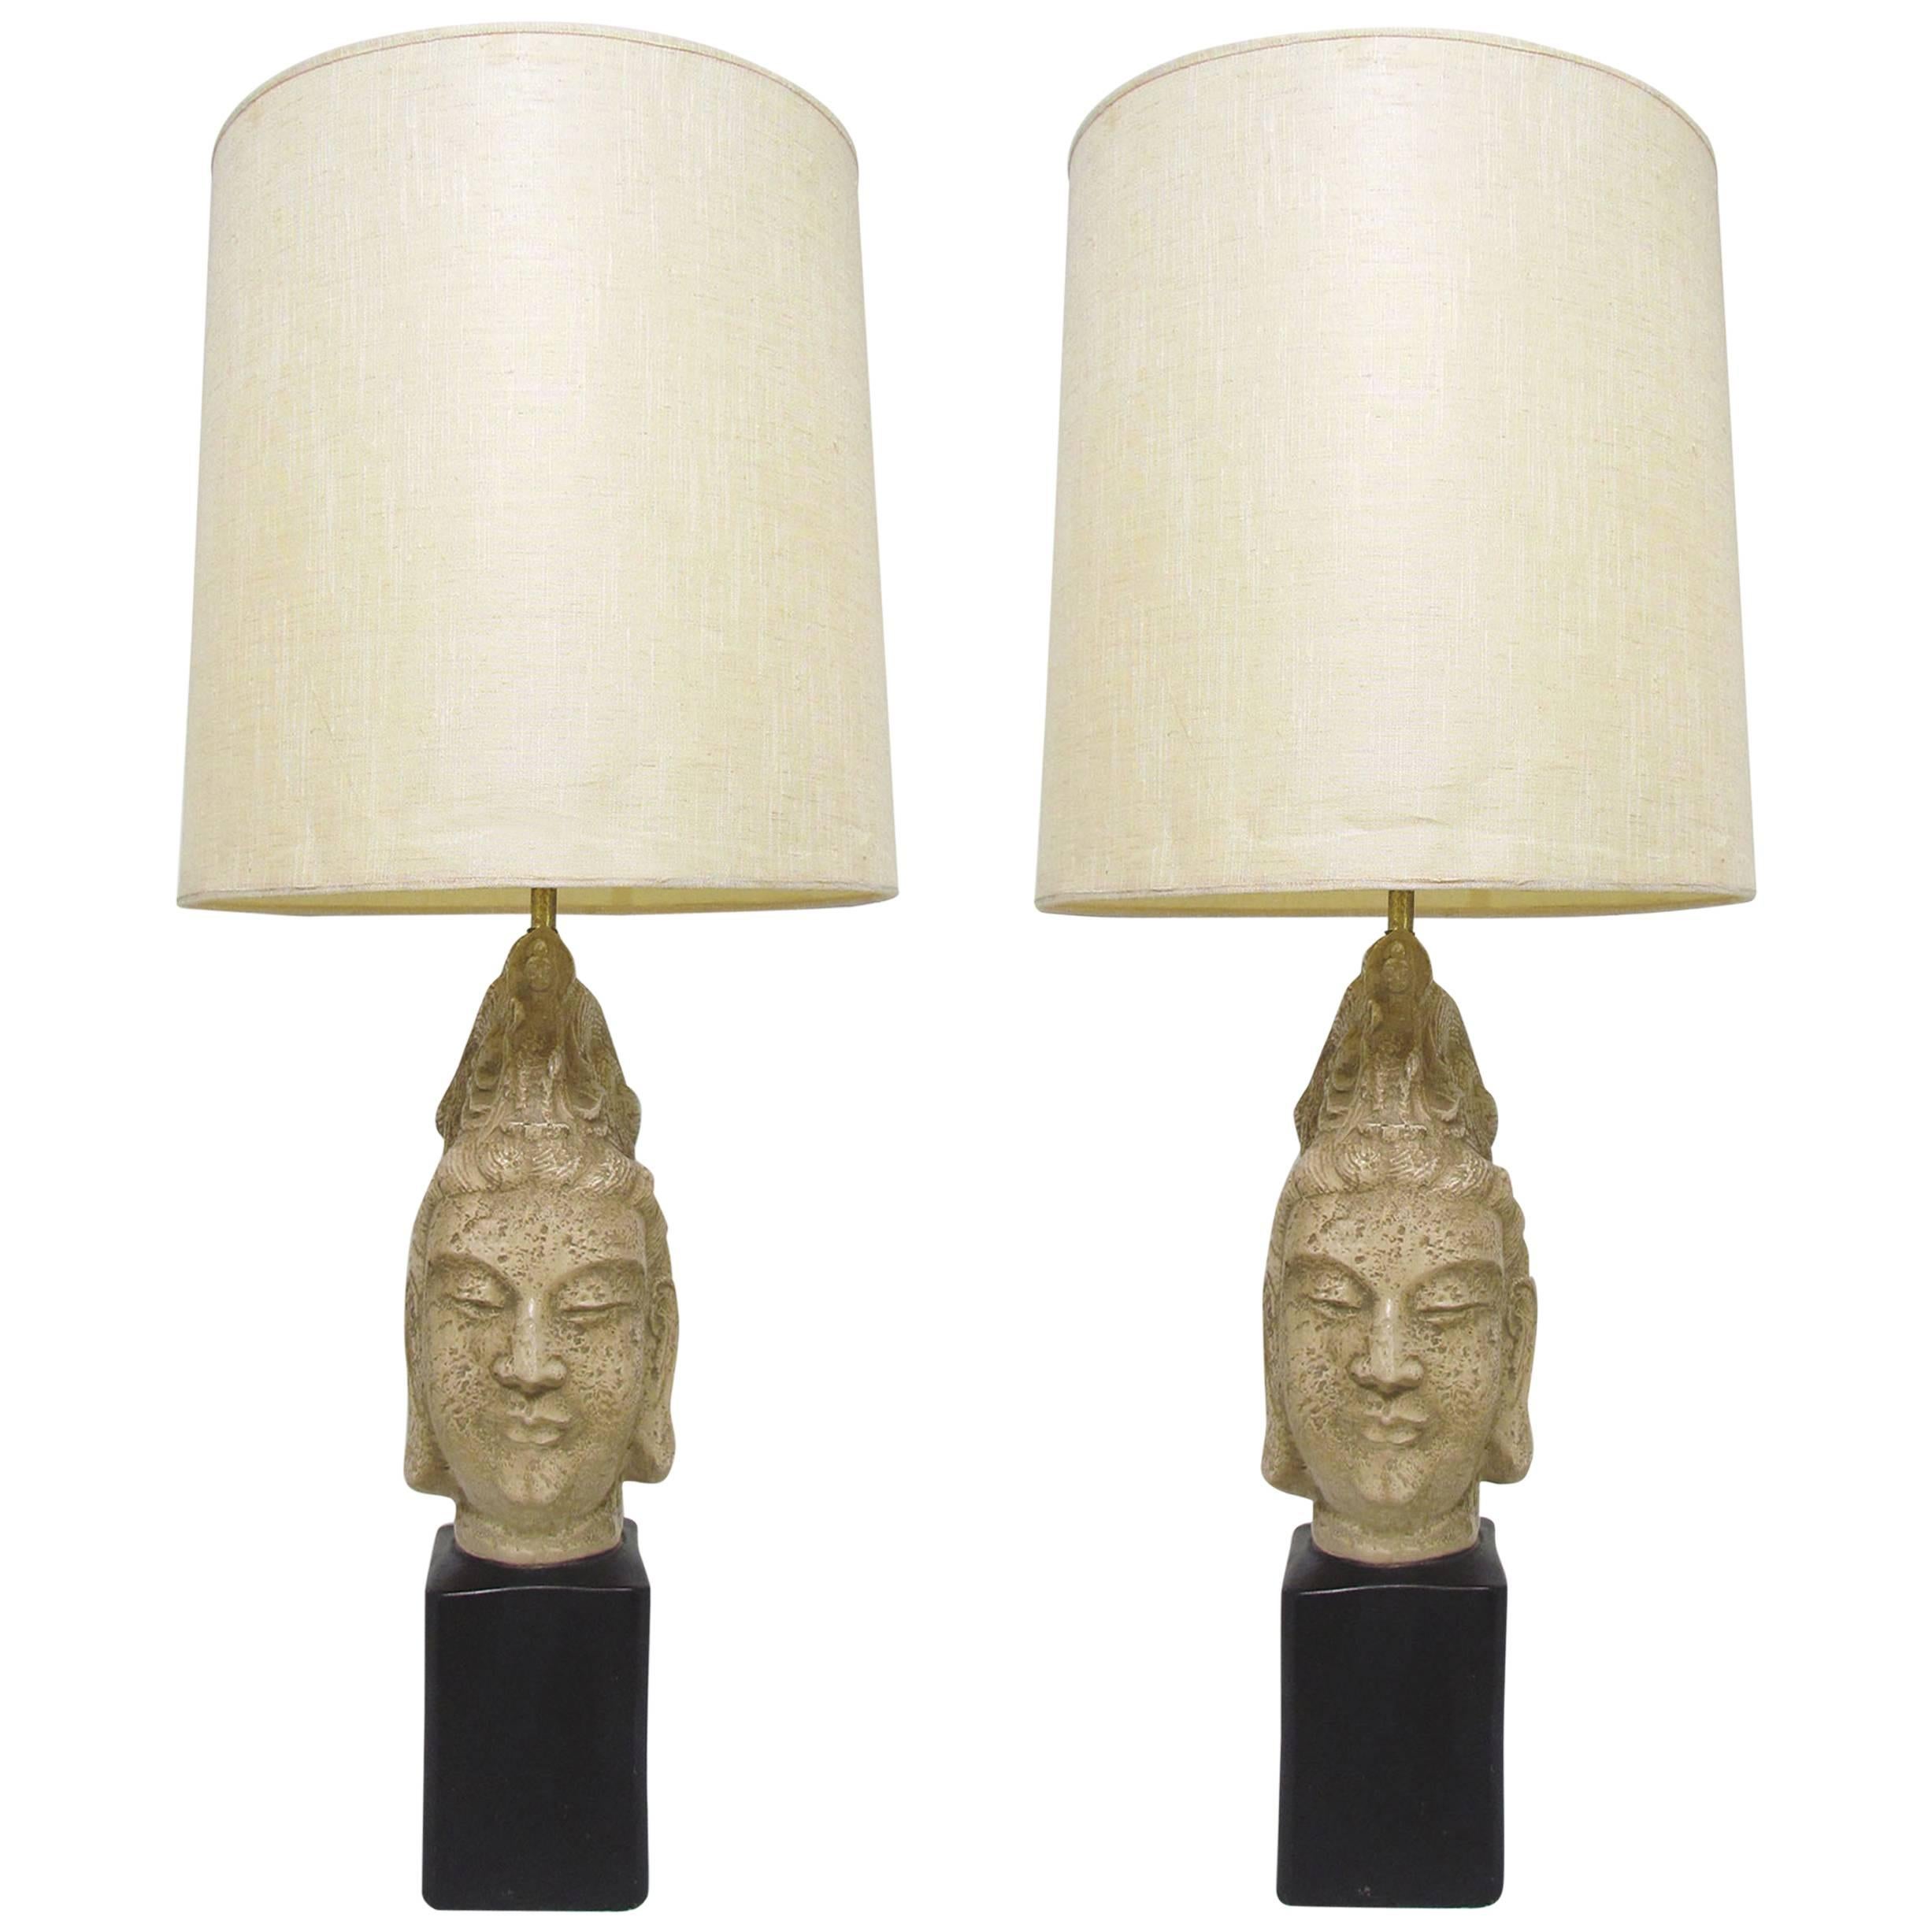 Pair of Buddha Table Lamps in the Manner of James Mont